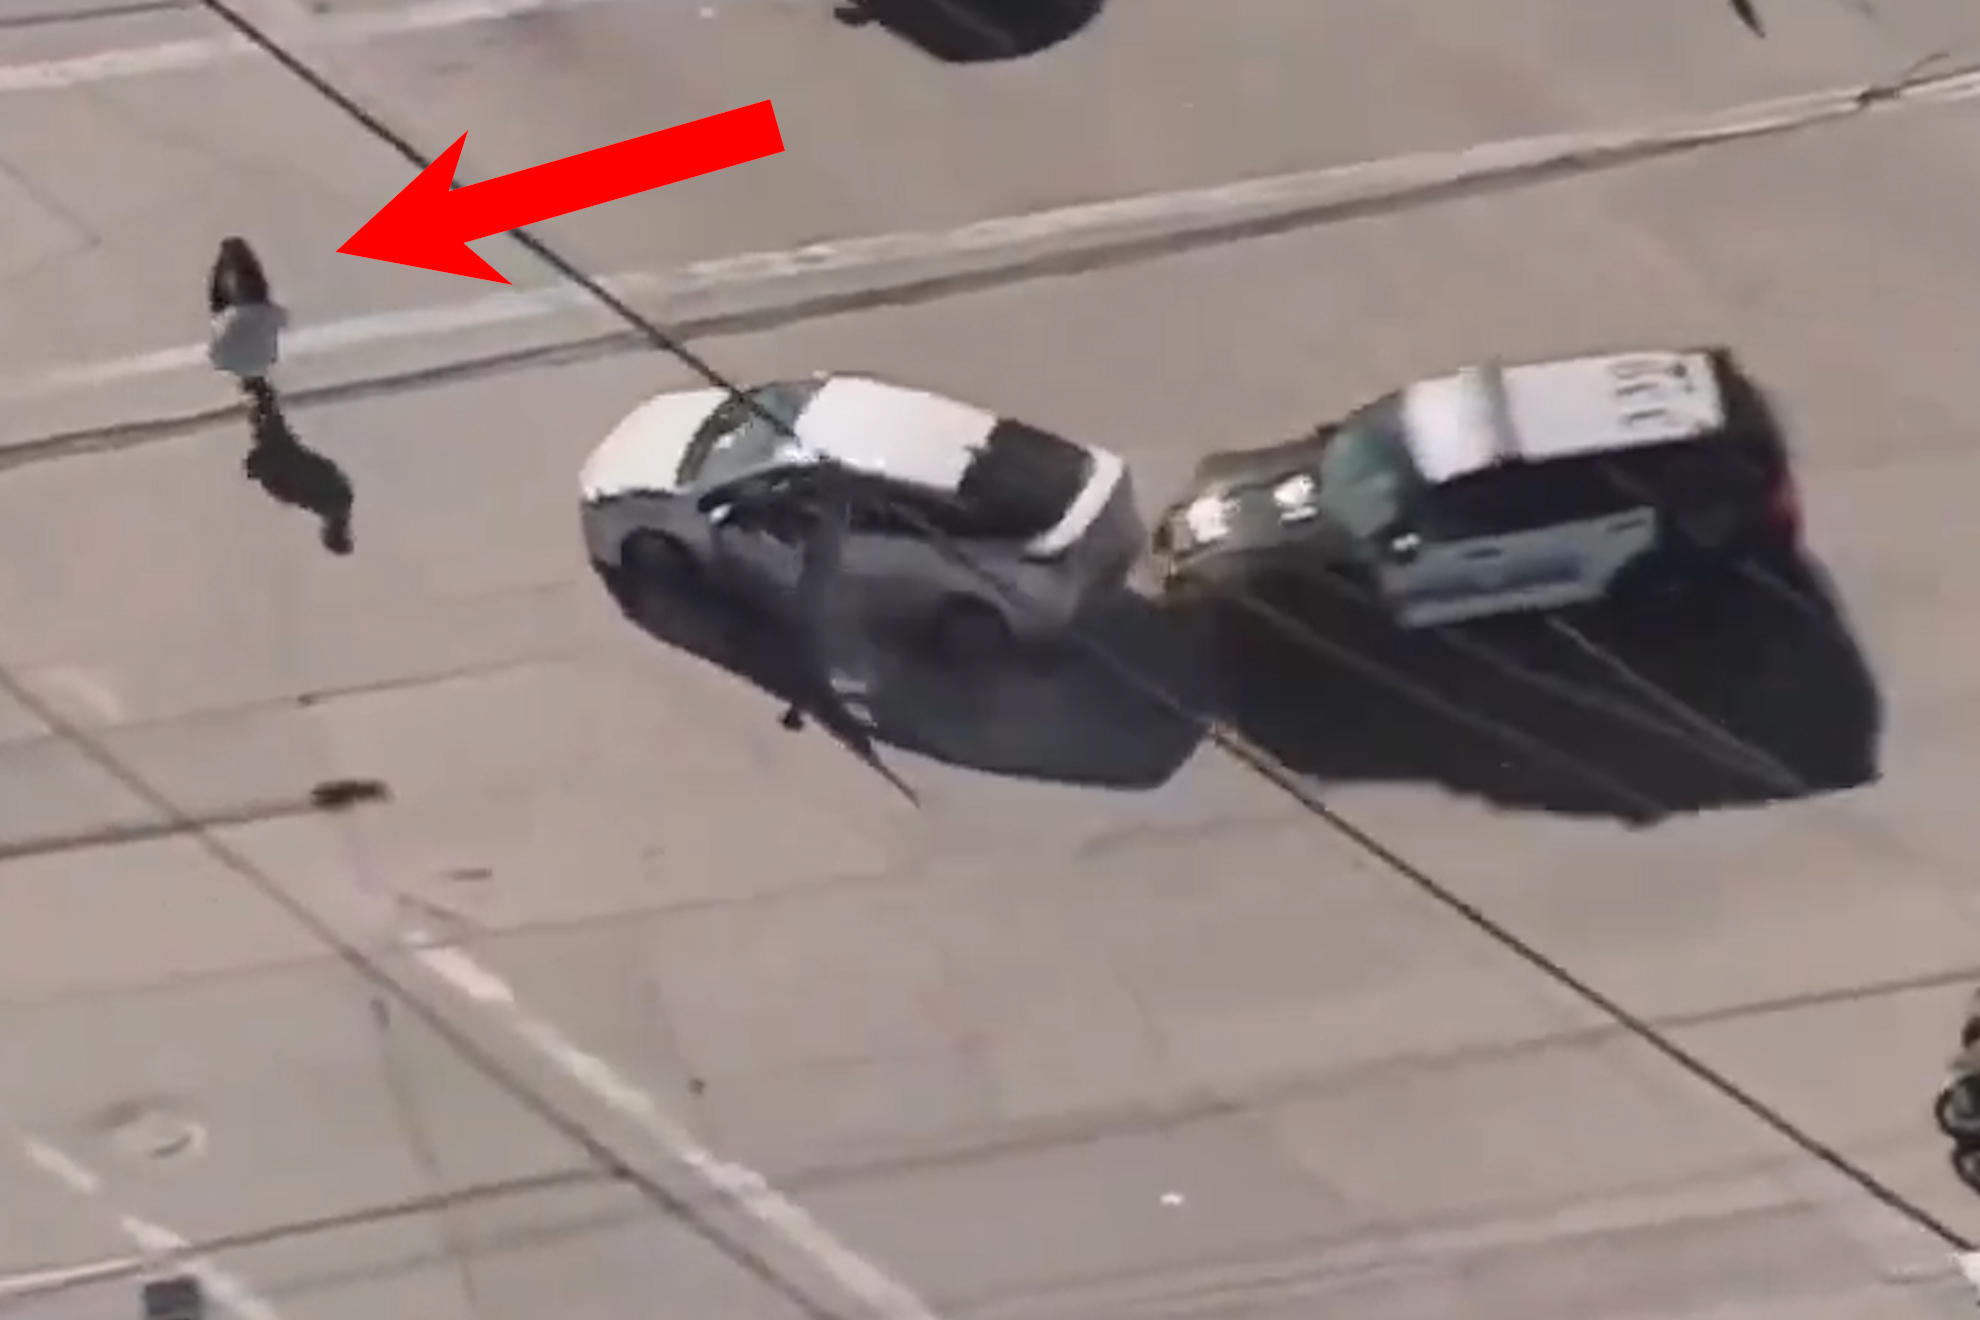 Cops ram suspect in dramatic high-speed chase directly into innocent bystander